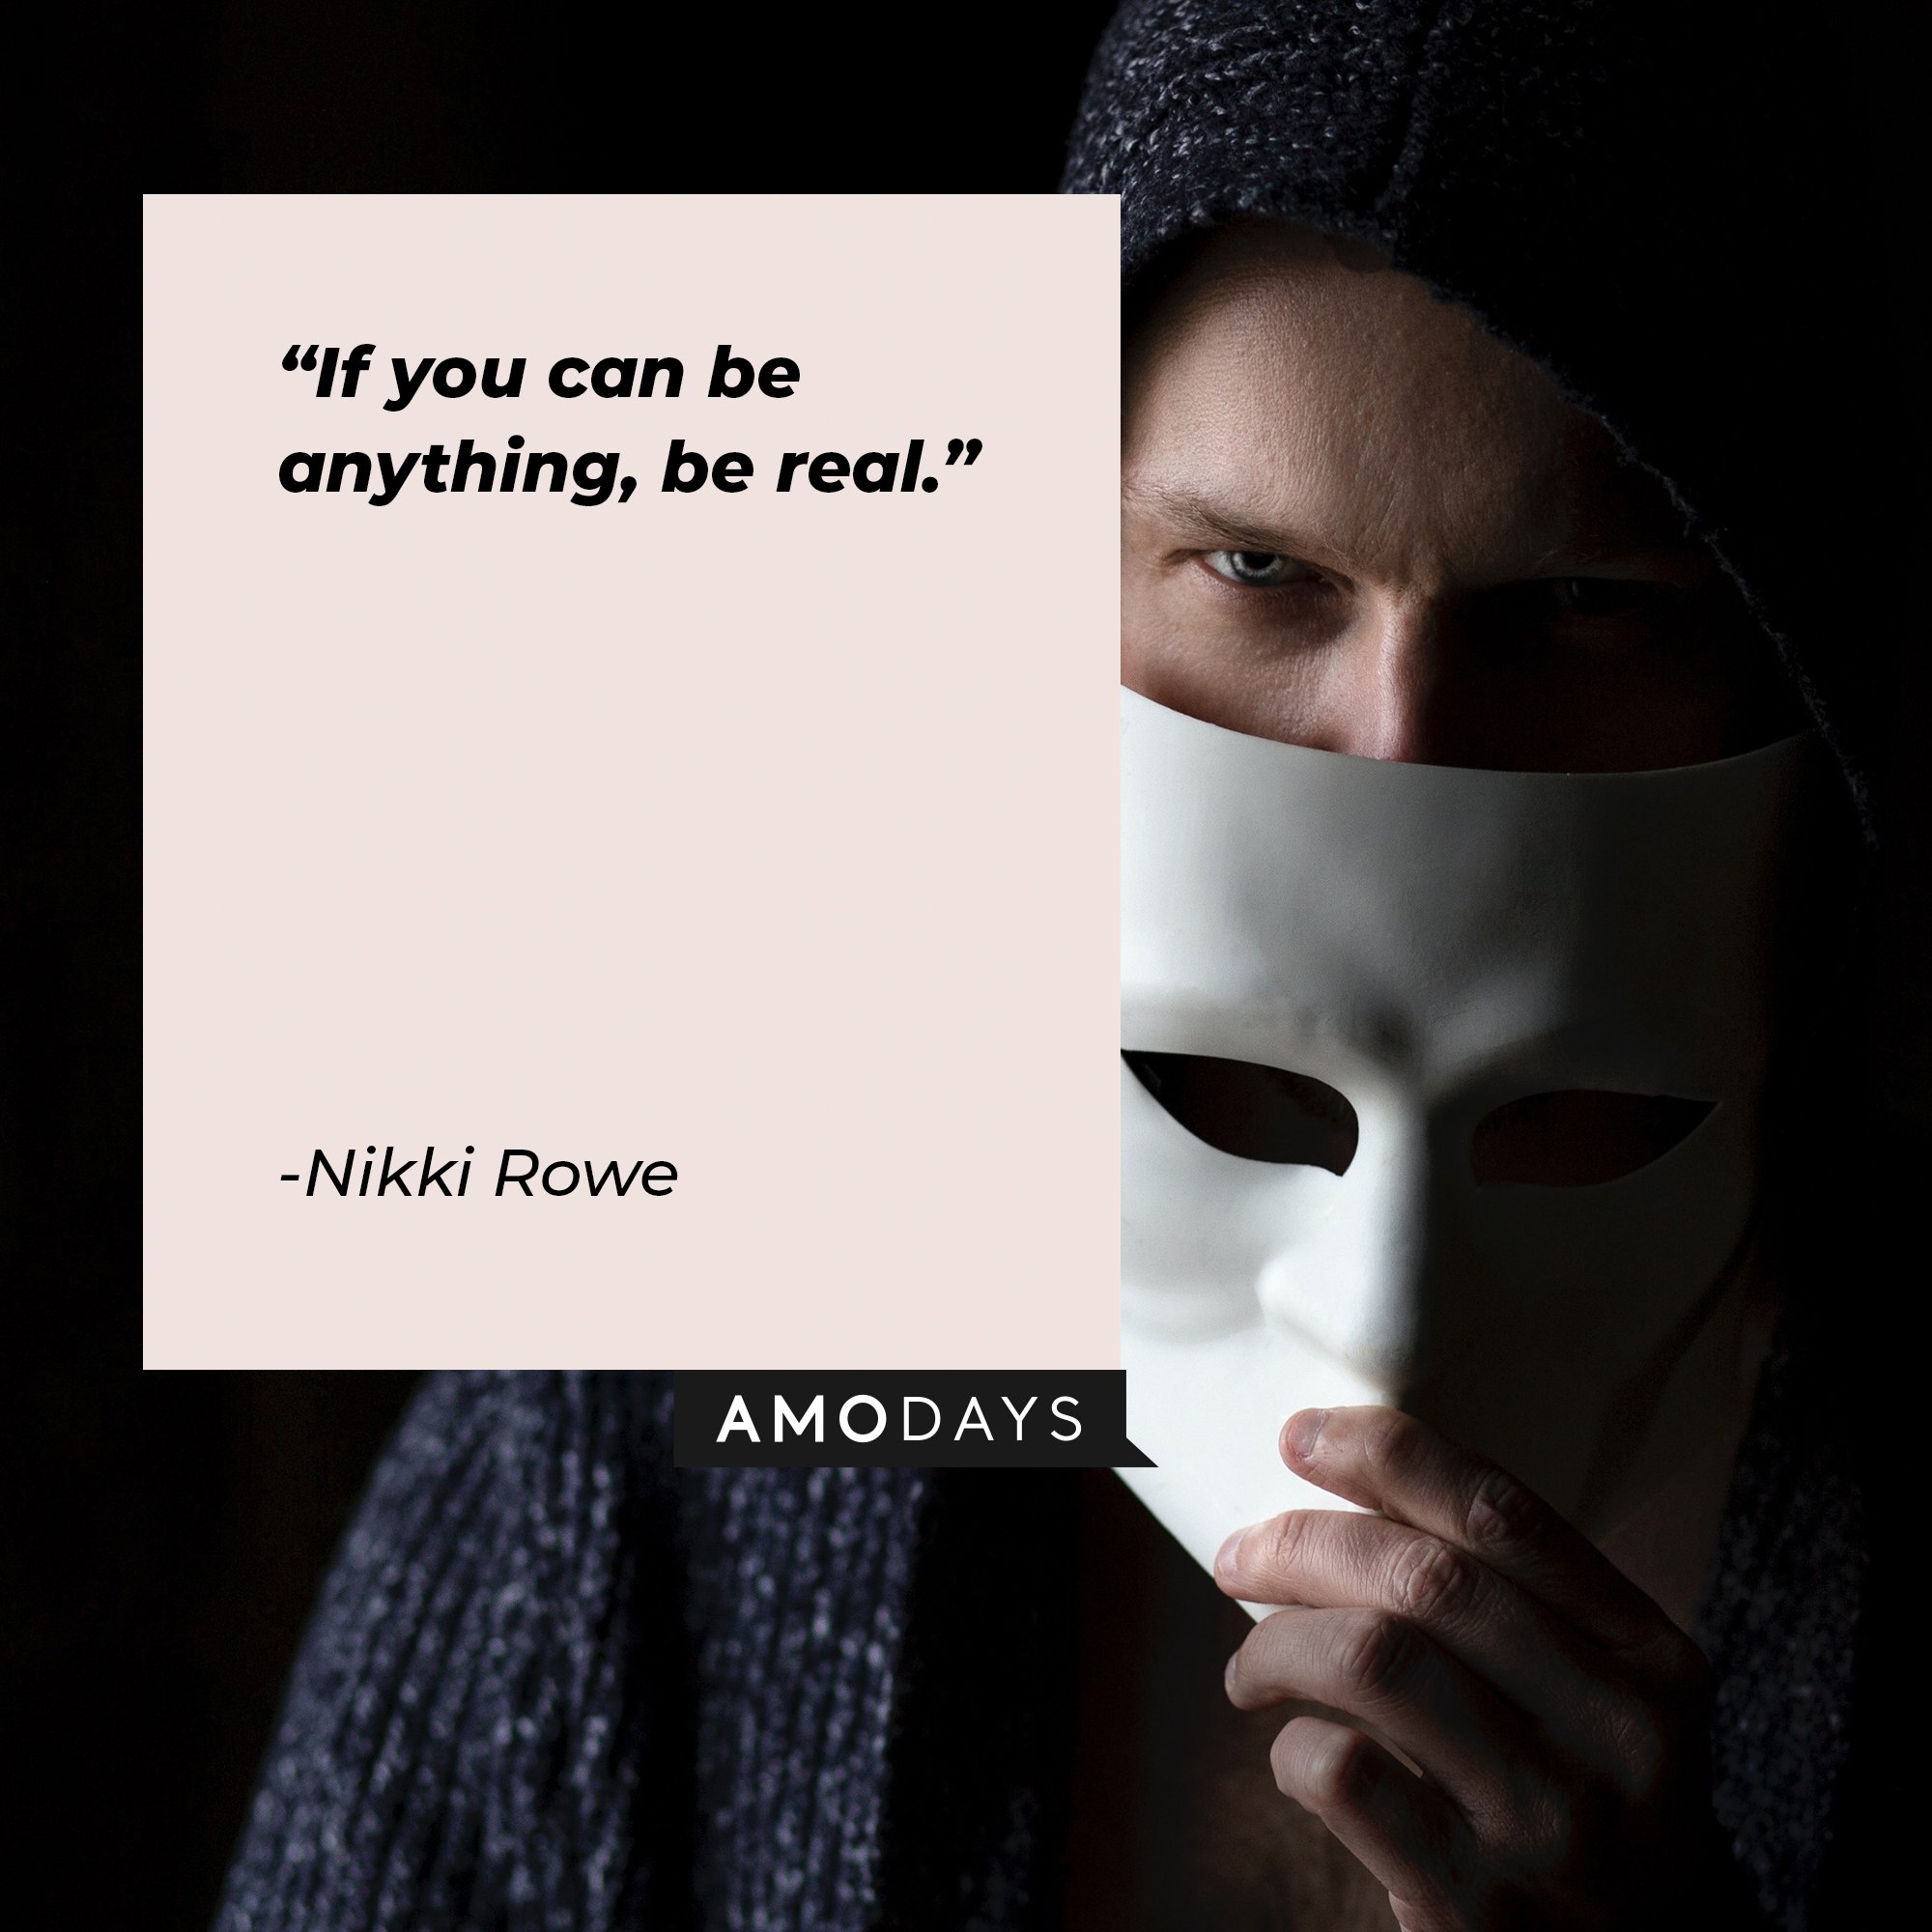 Nikki Rowe’s quote: "If you can be anything, be real." | Image: AmoDays